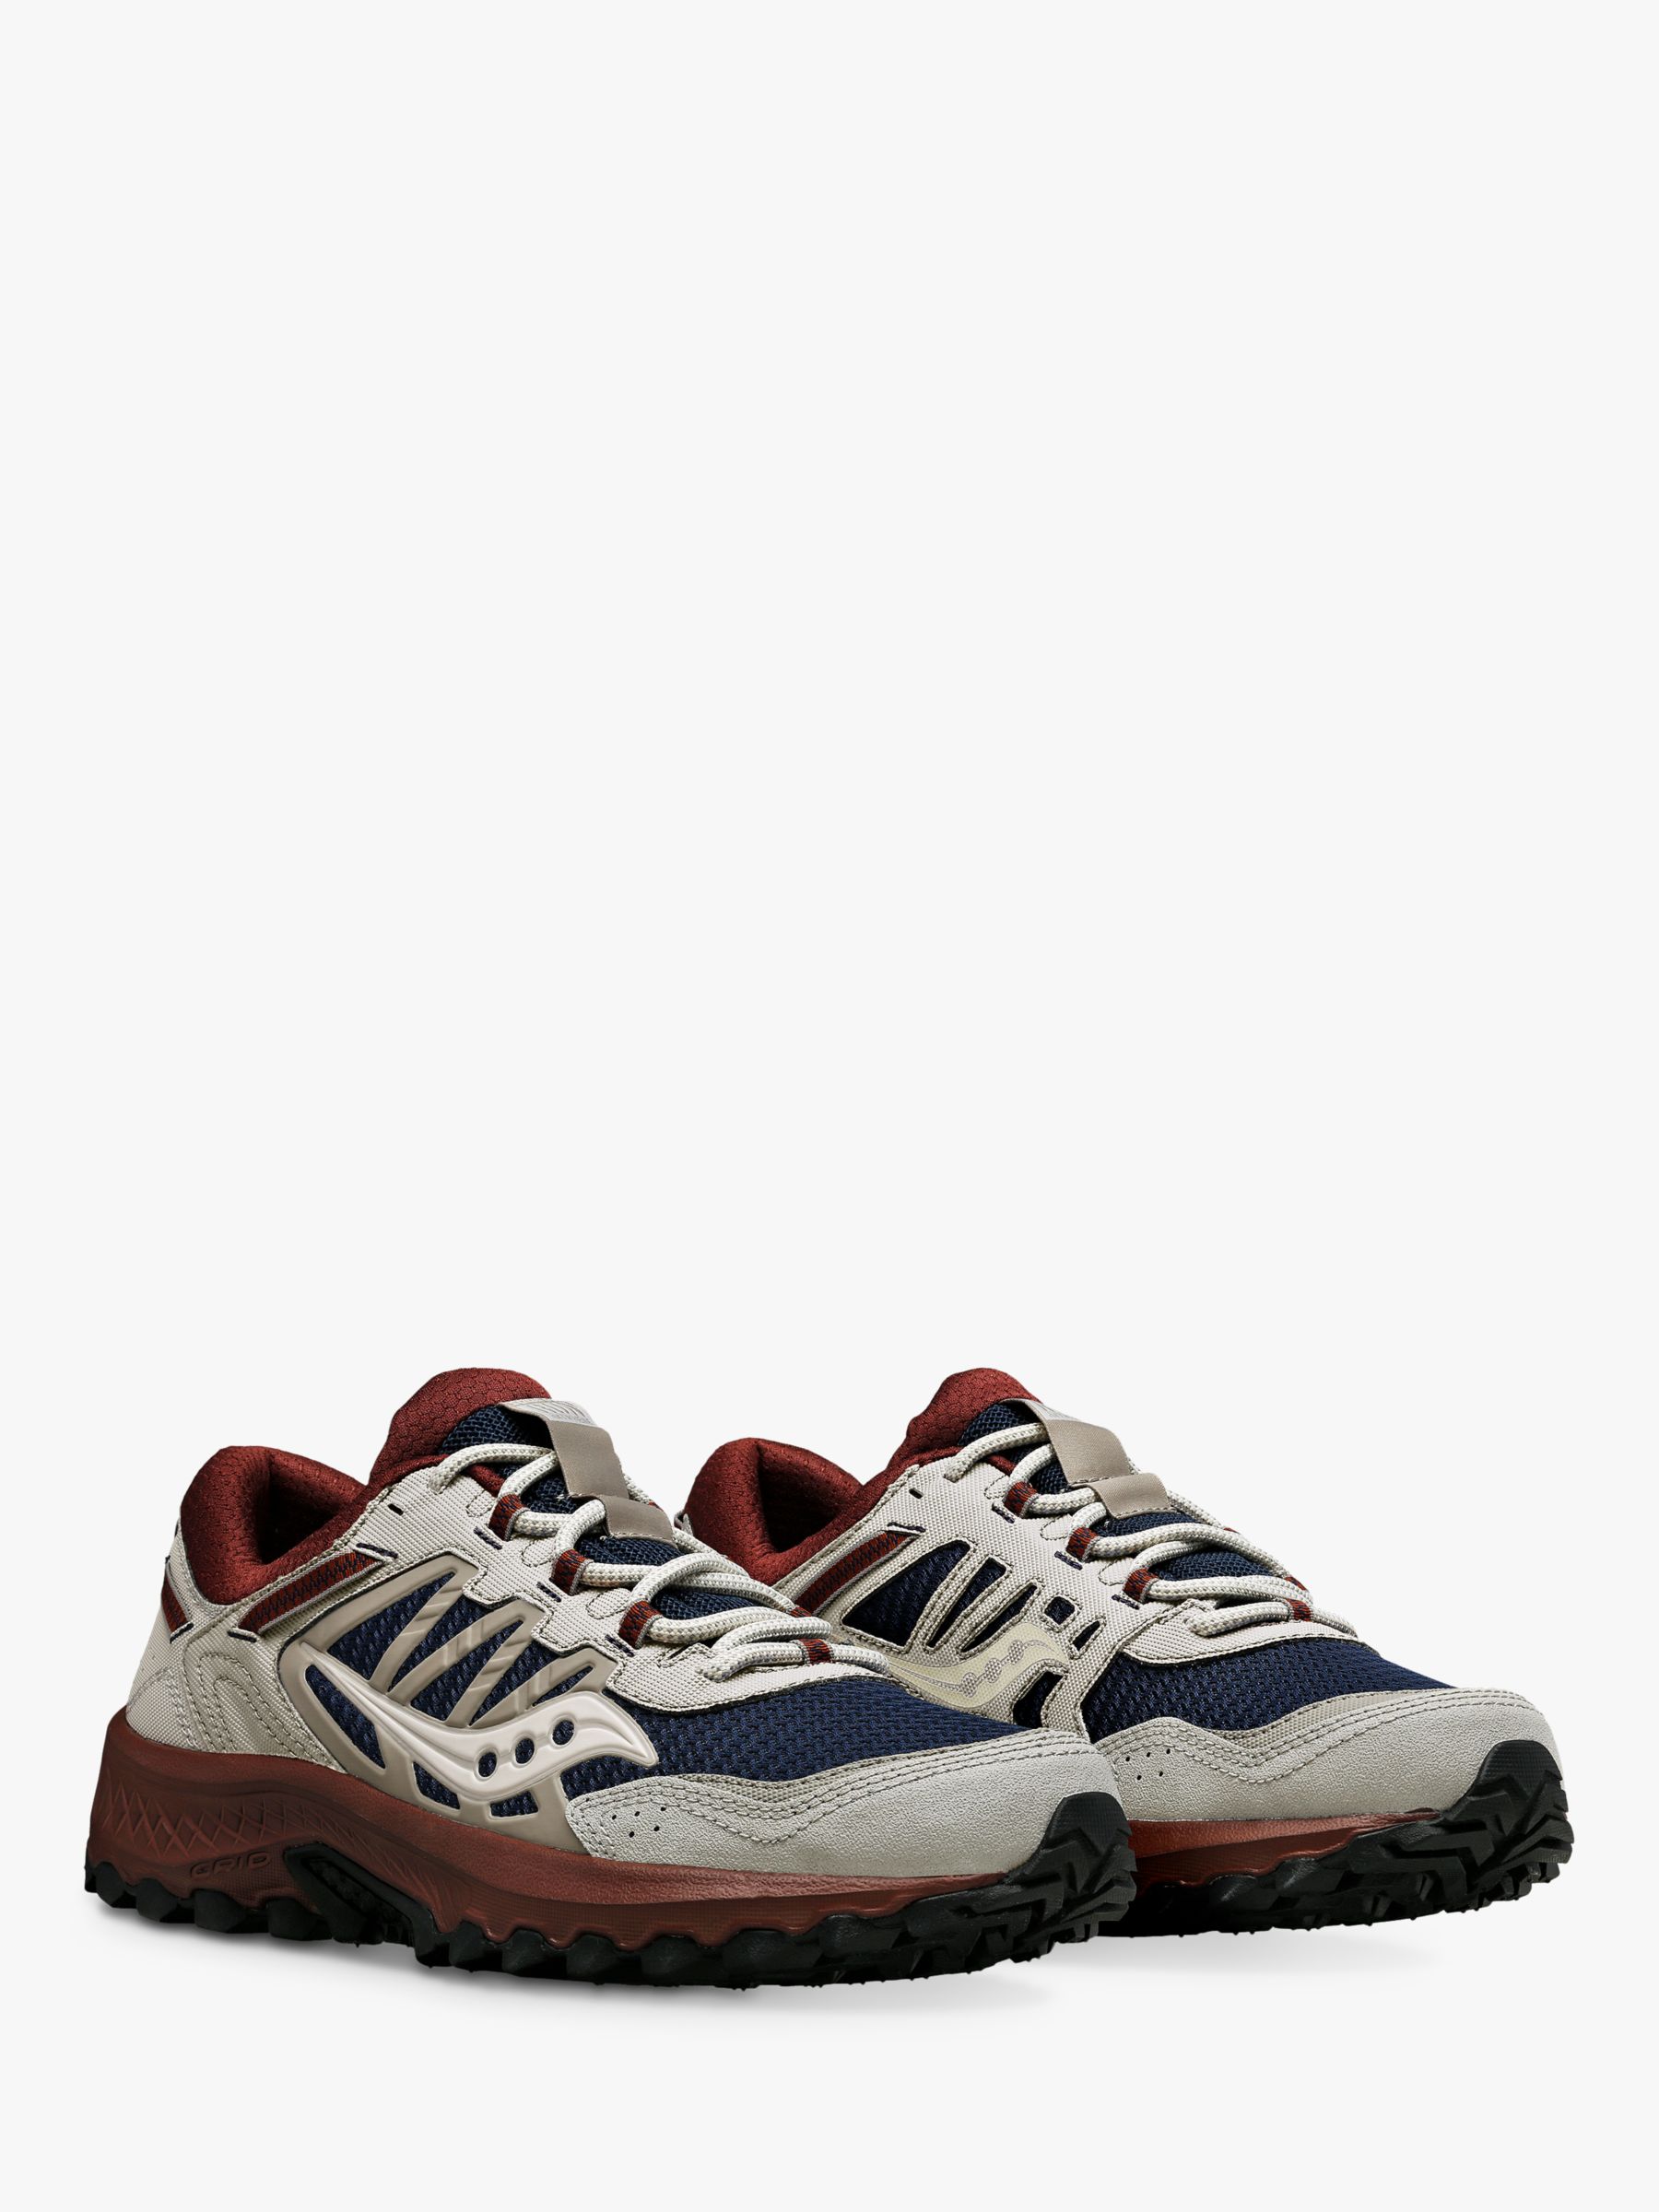 Buy Saucony Grid Peak Lace Up Trainers Online at johnlewis.com